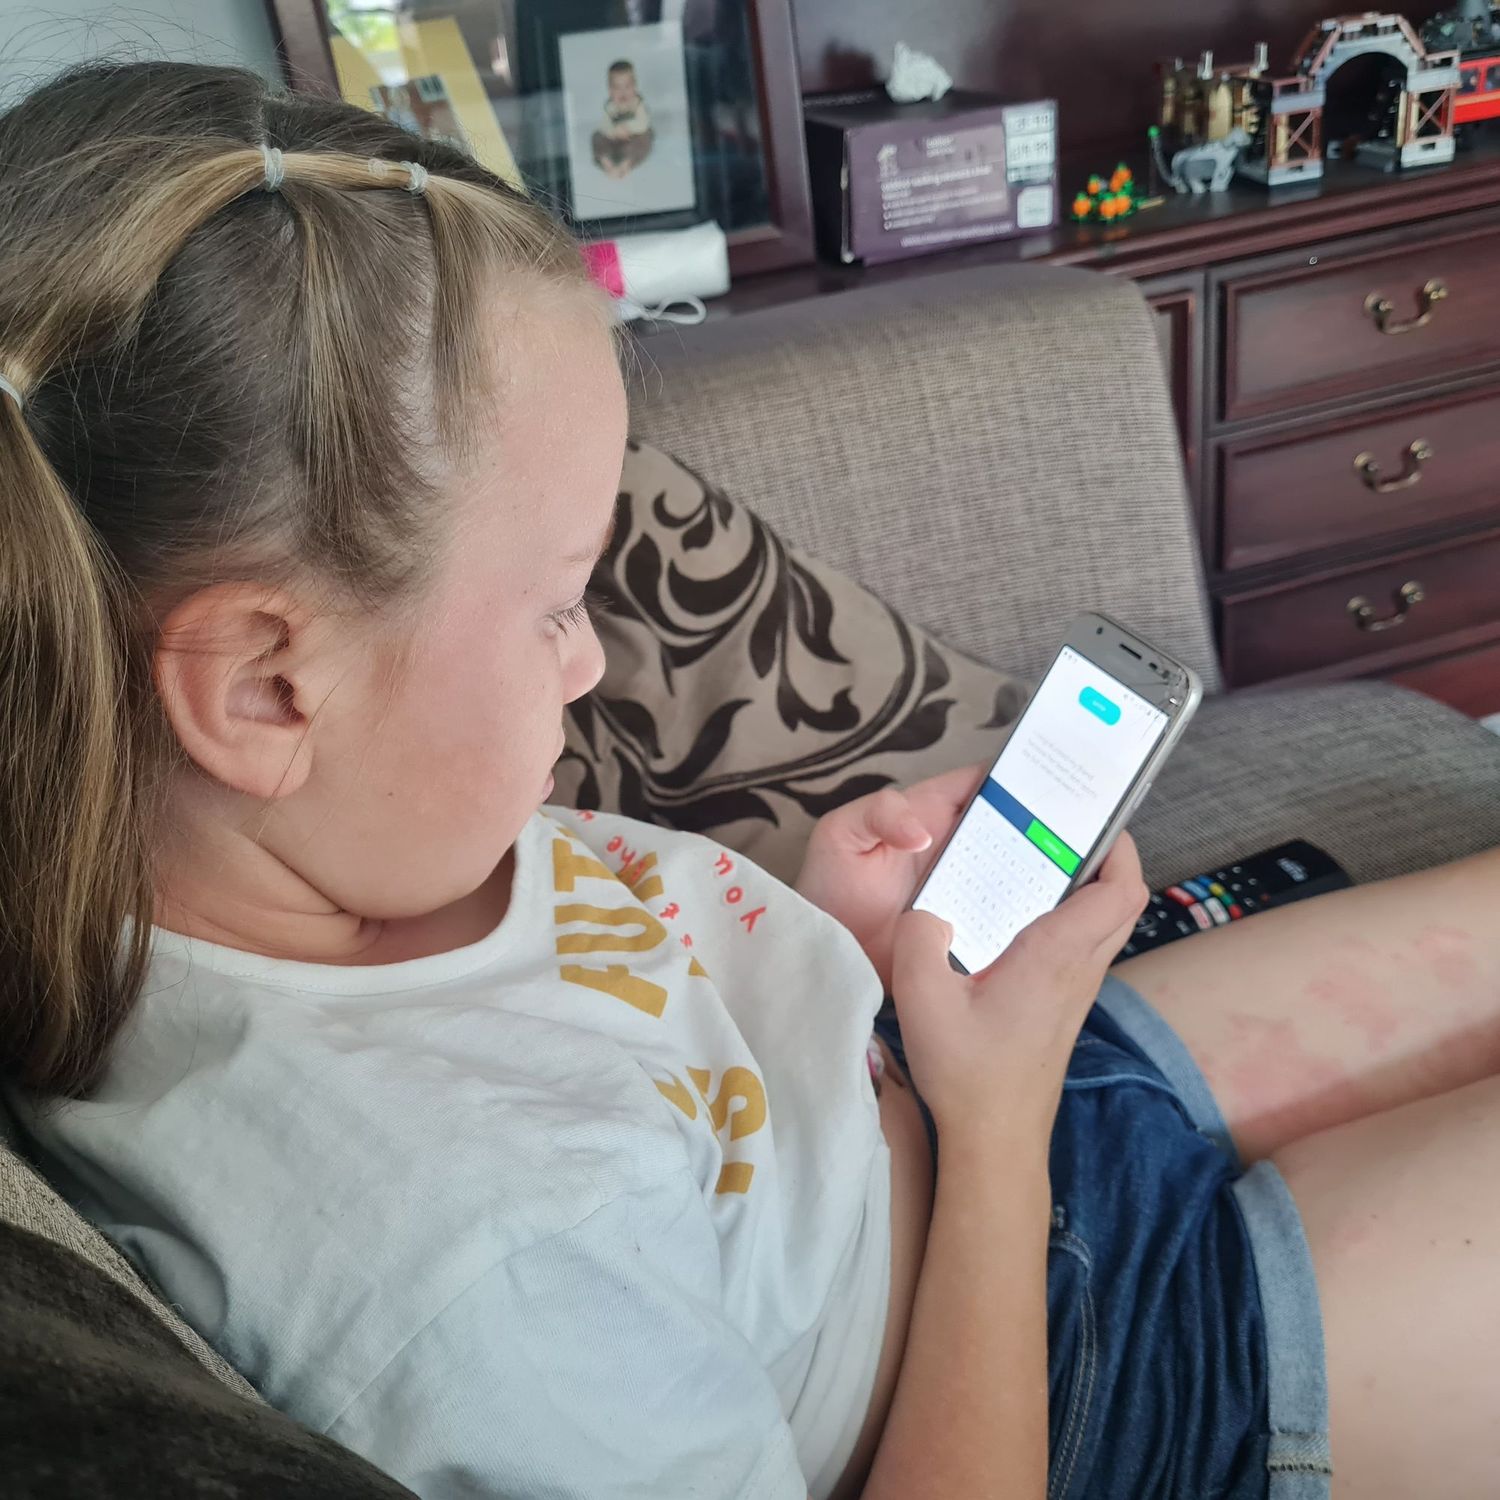 A child working on Bedrock on her phone